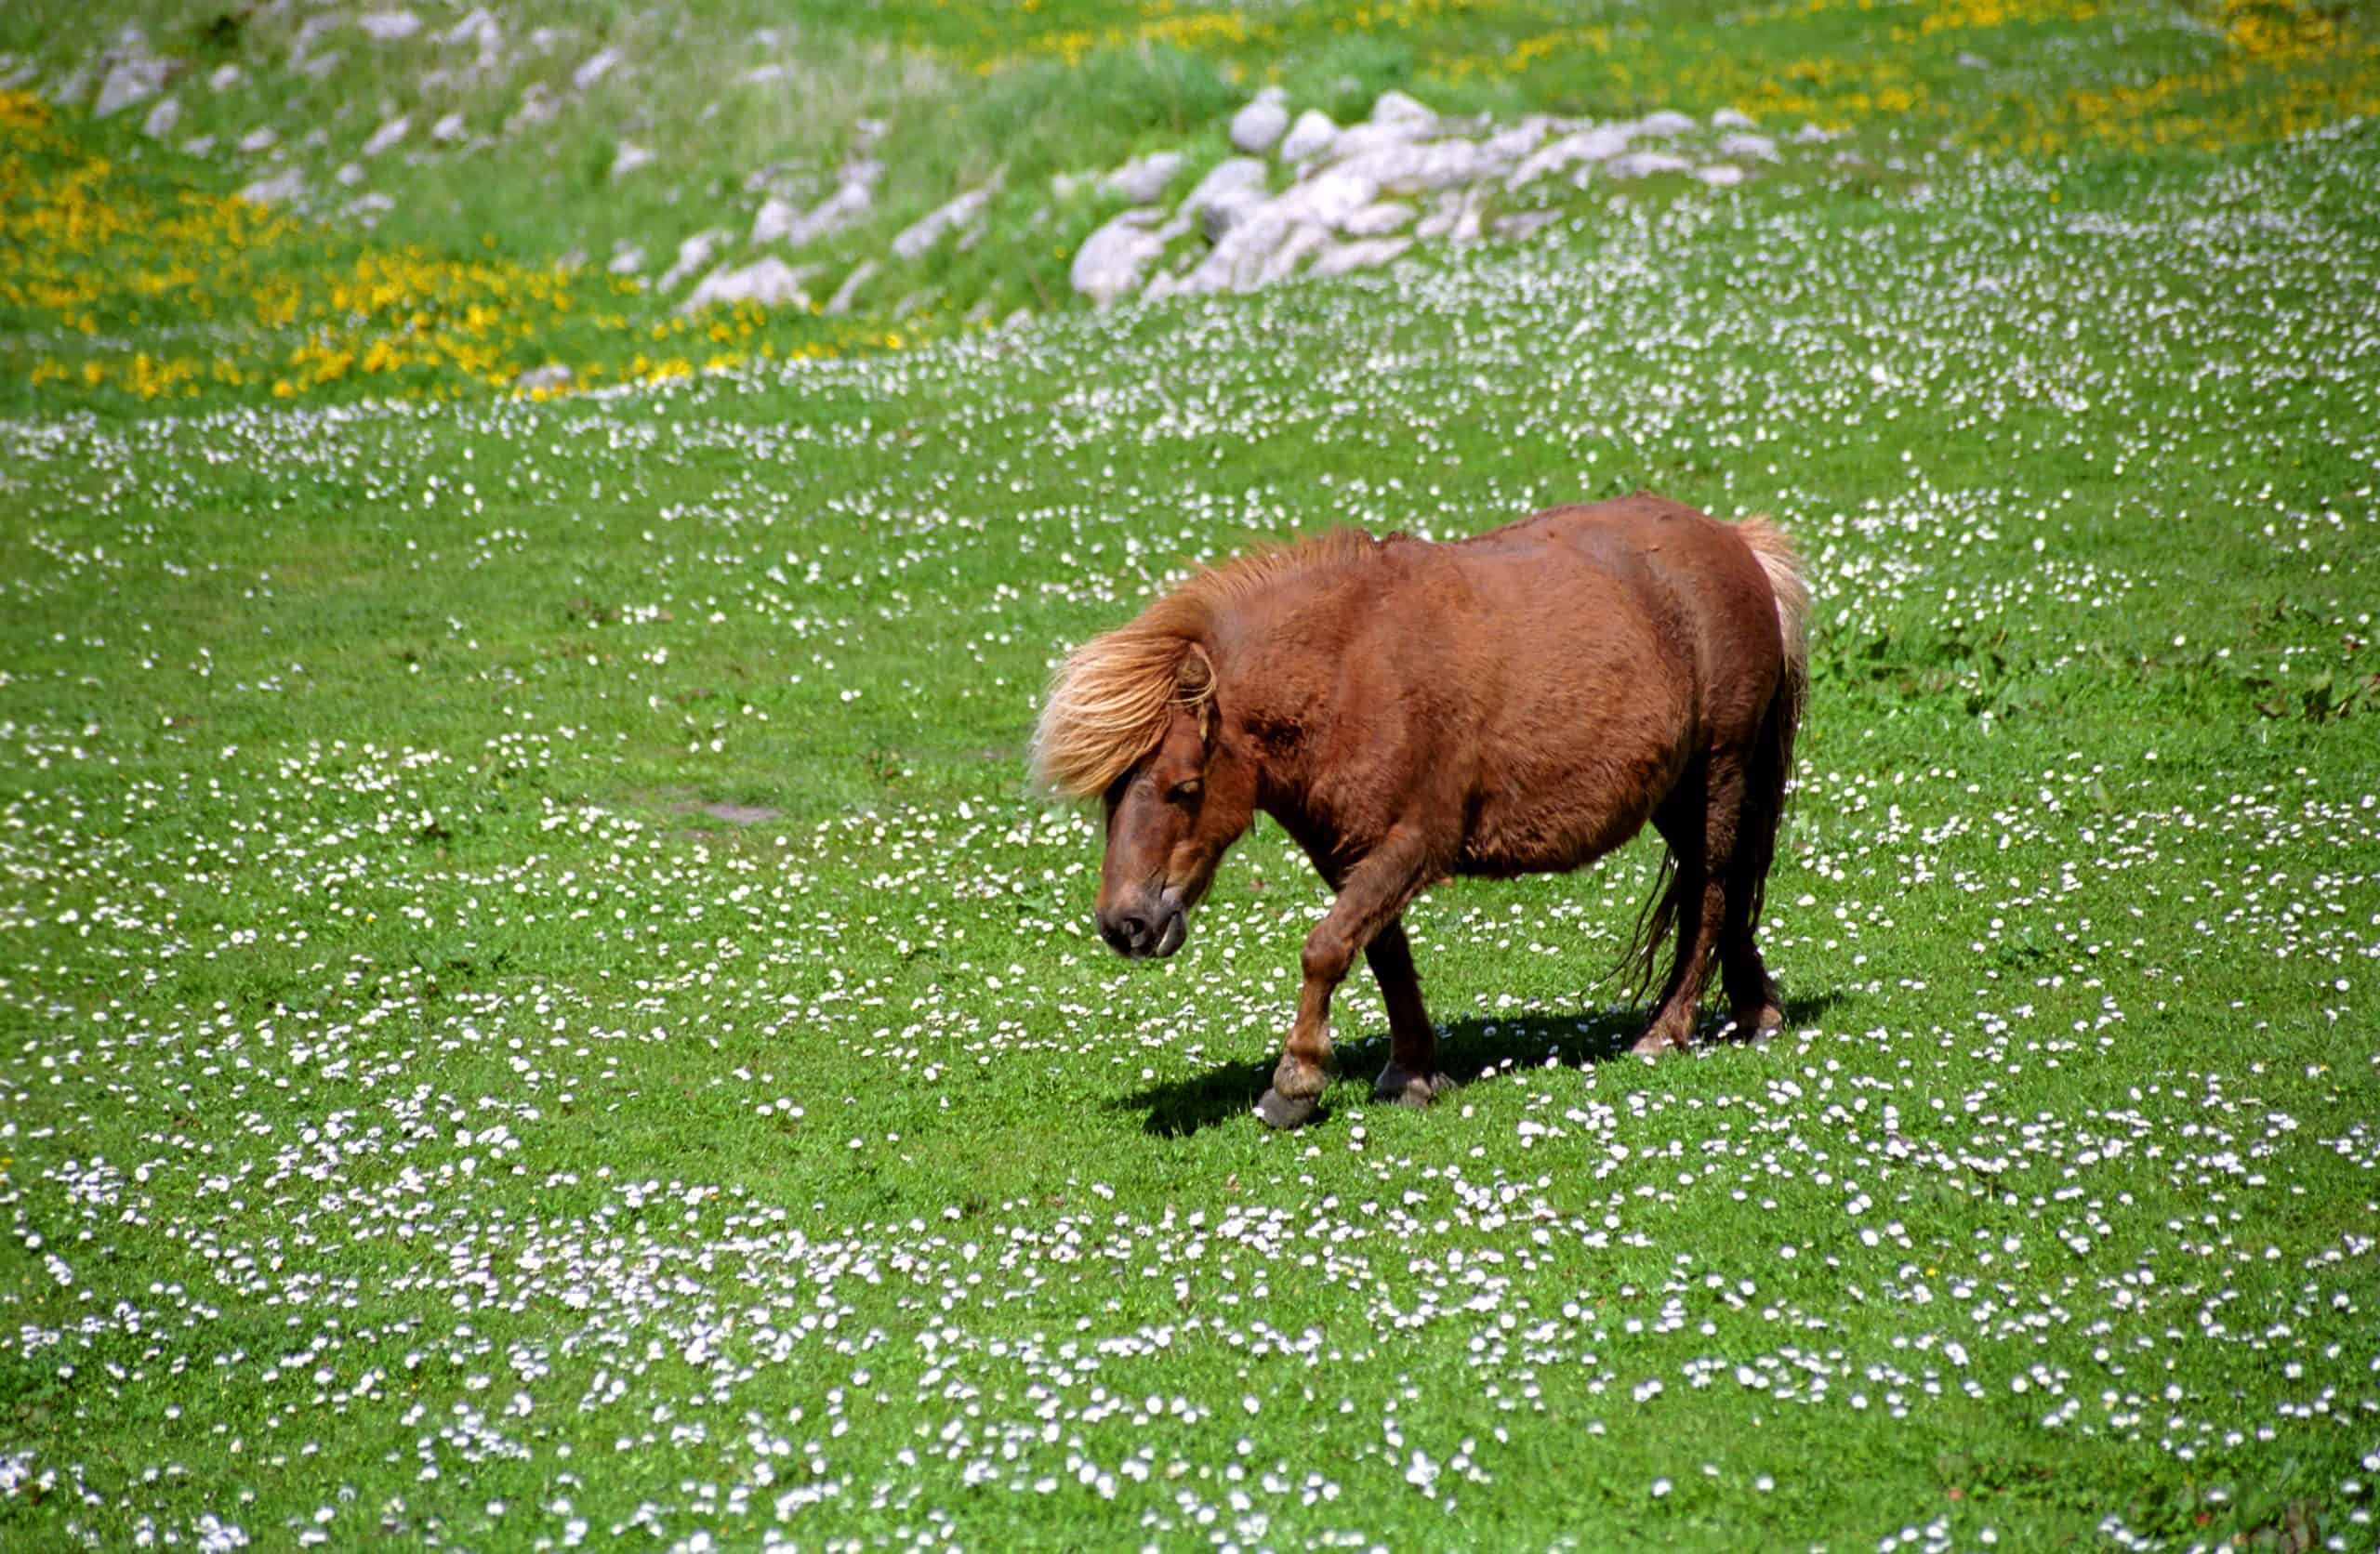 Shetland pony is a speceila species of pony horses, endemic to the Shetland Islands.